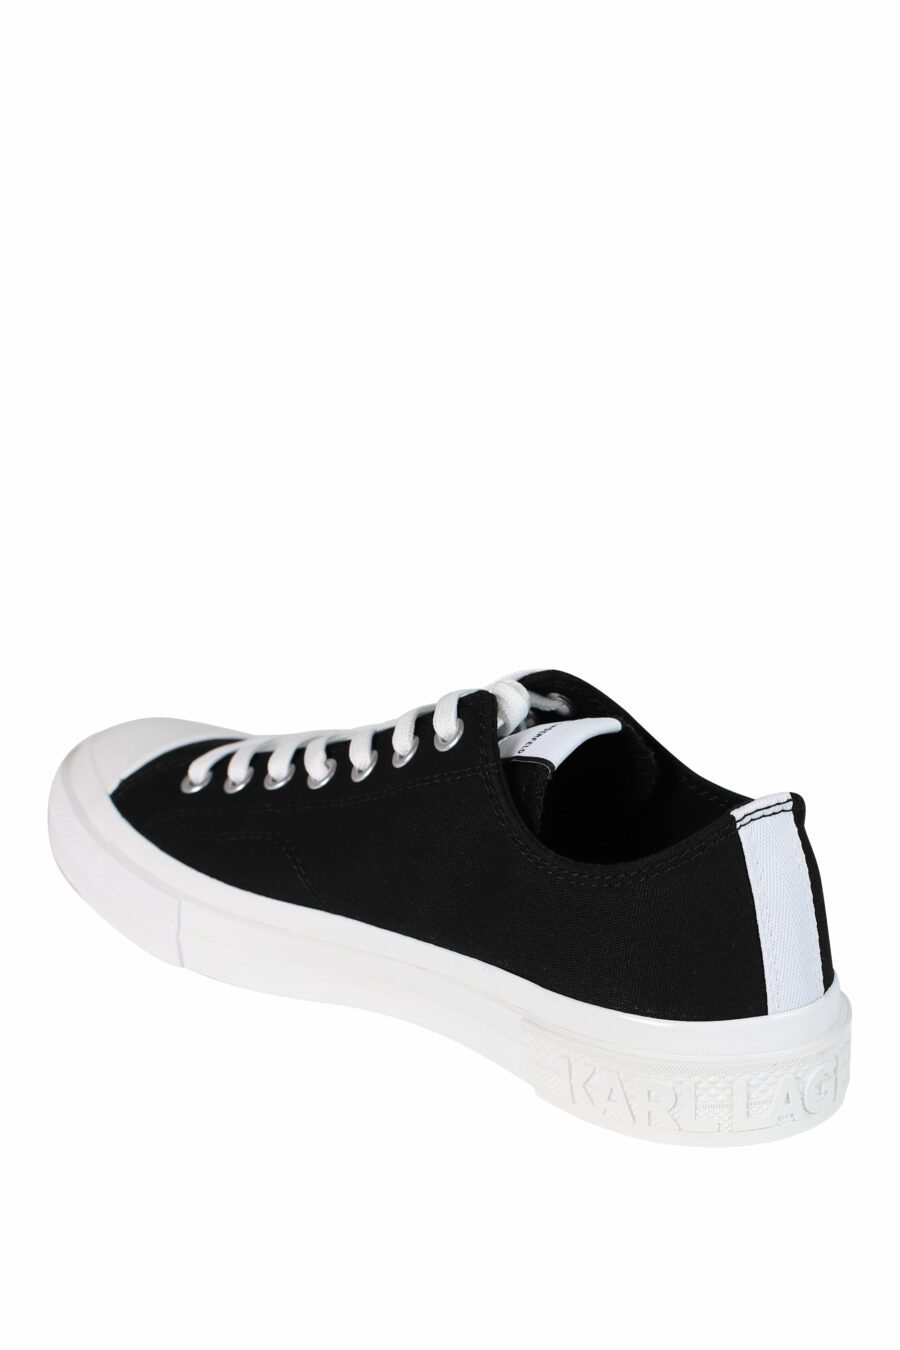 Black trainers with "karl" logo and white sole - 5059529249655 4